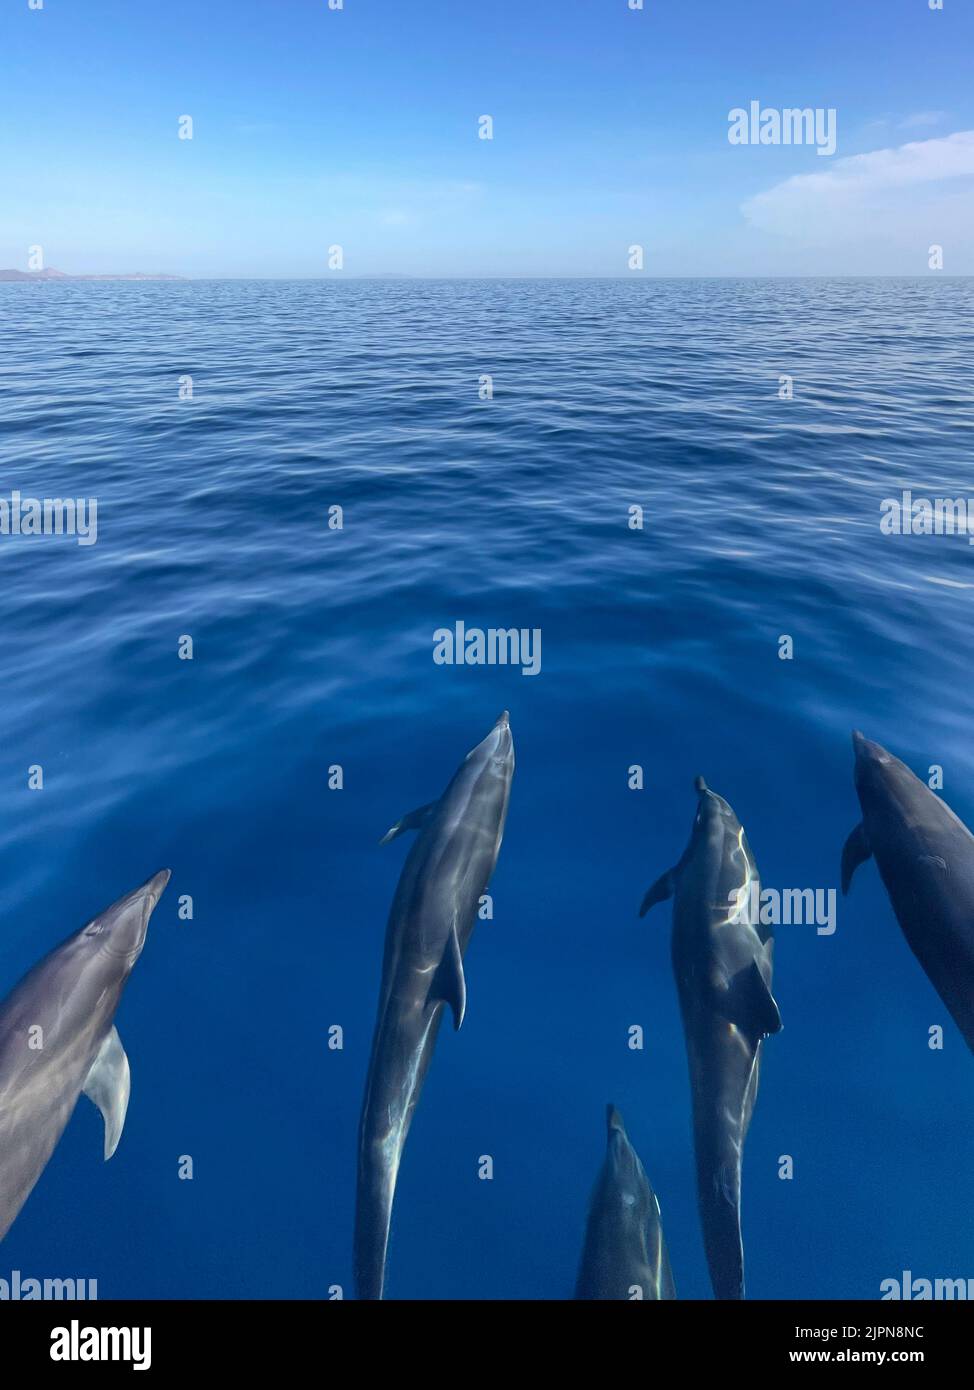 Dolphins swimming in clear, blue, glassy water Stock Photo